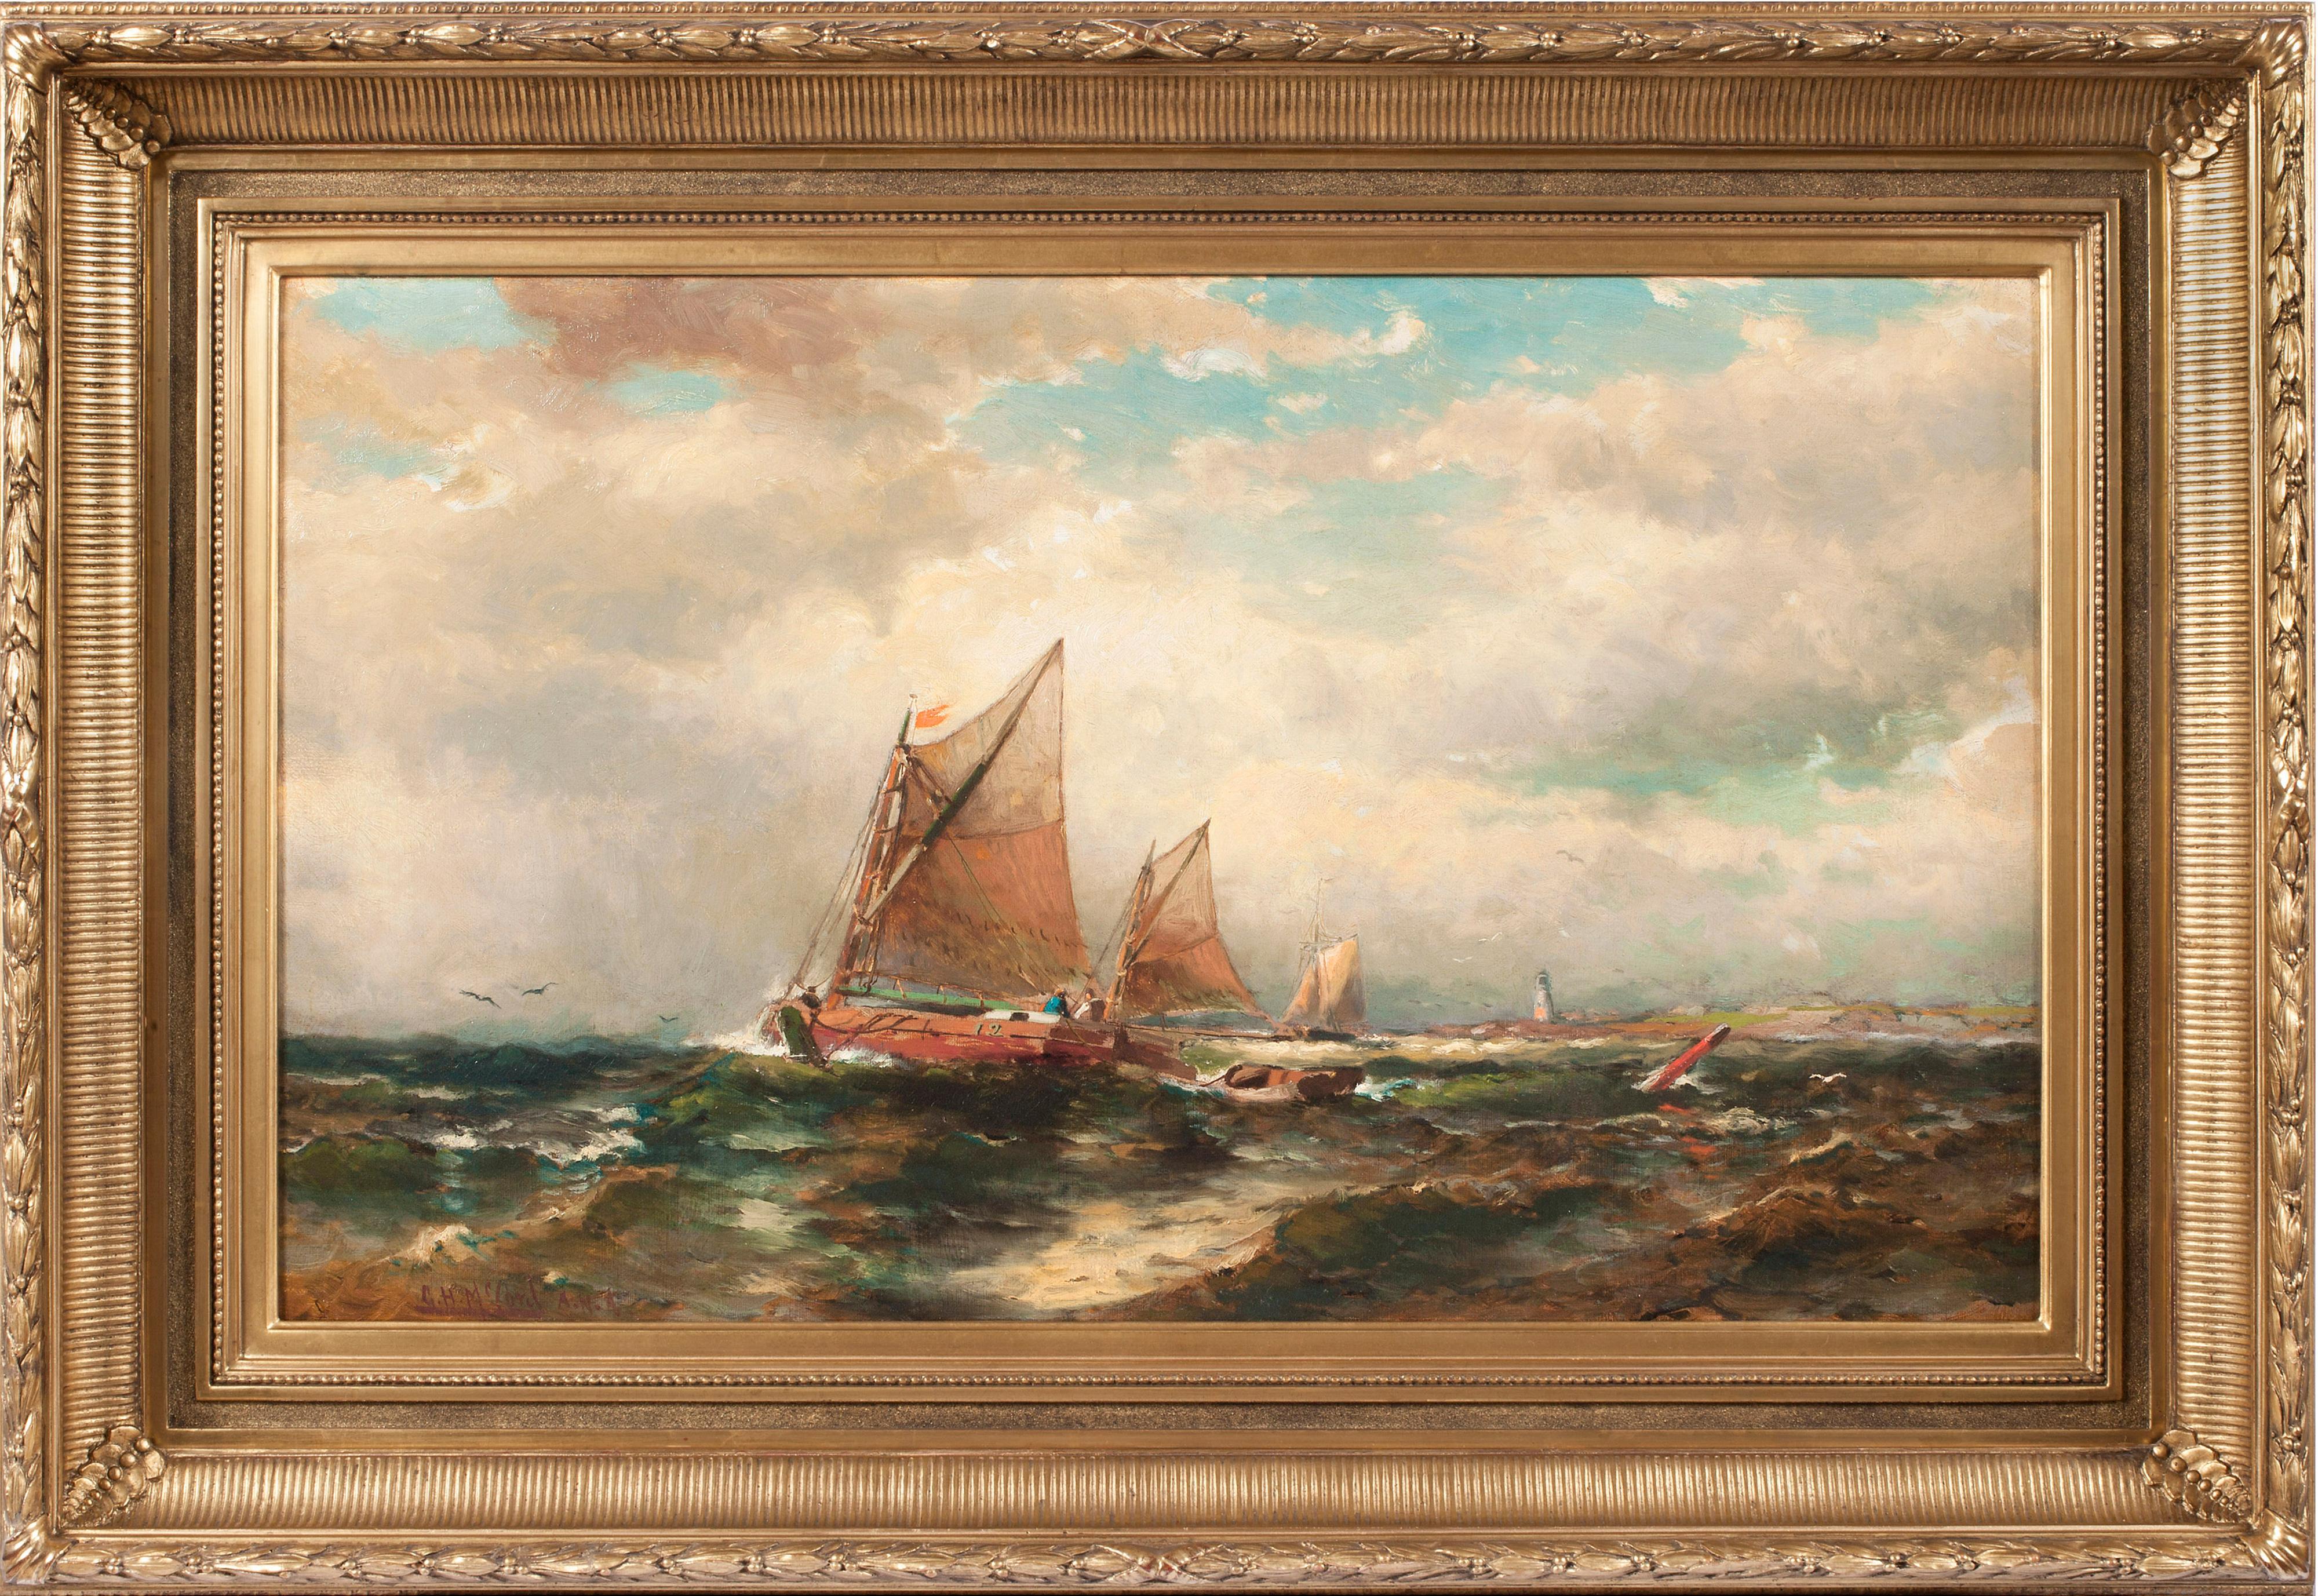 "Seascape," by Hudson River School artist George Herbert McCord (1848-1909) is oil on canvas and measures 18.07 x 30.13 inches. The work which comes from a private collection in Birmingham, Alabama is signed “G.H. McCord A.N.A.” at the lower left.